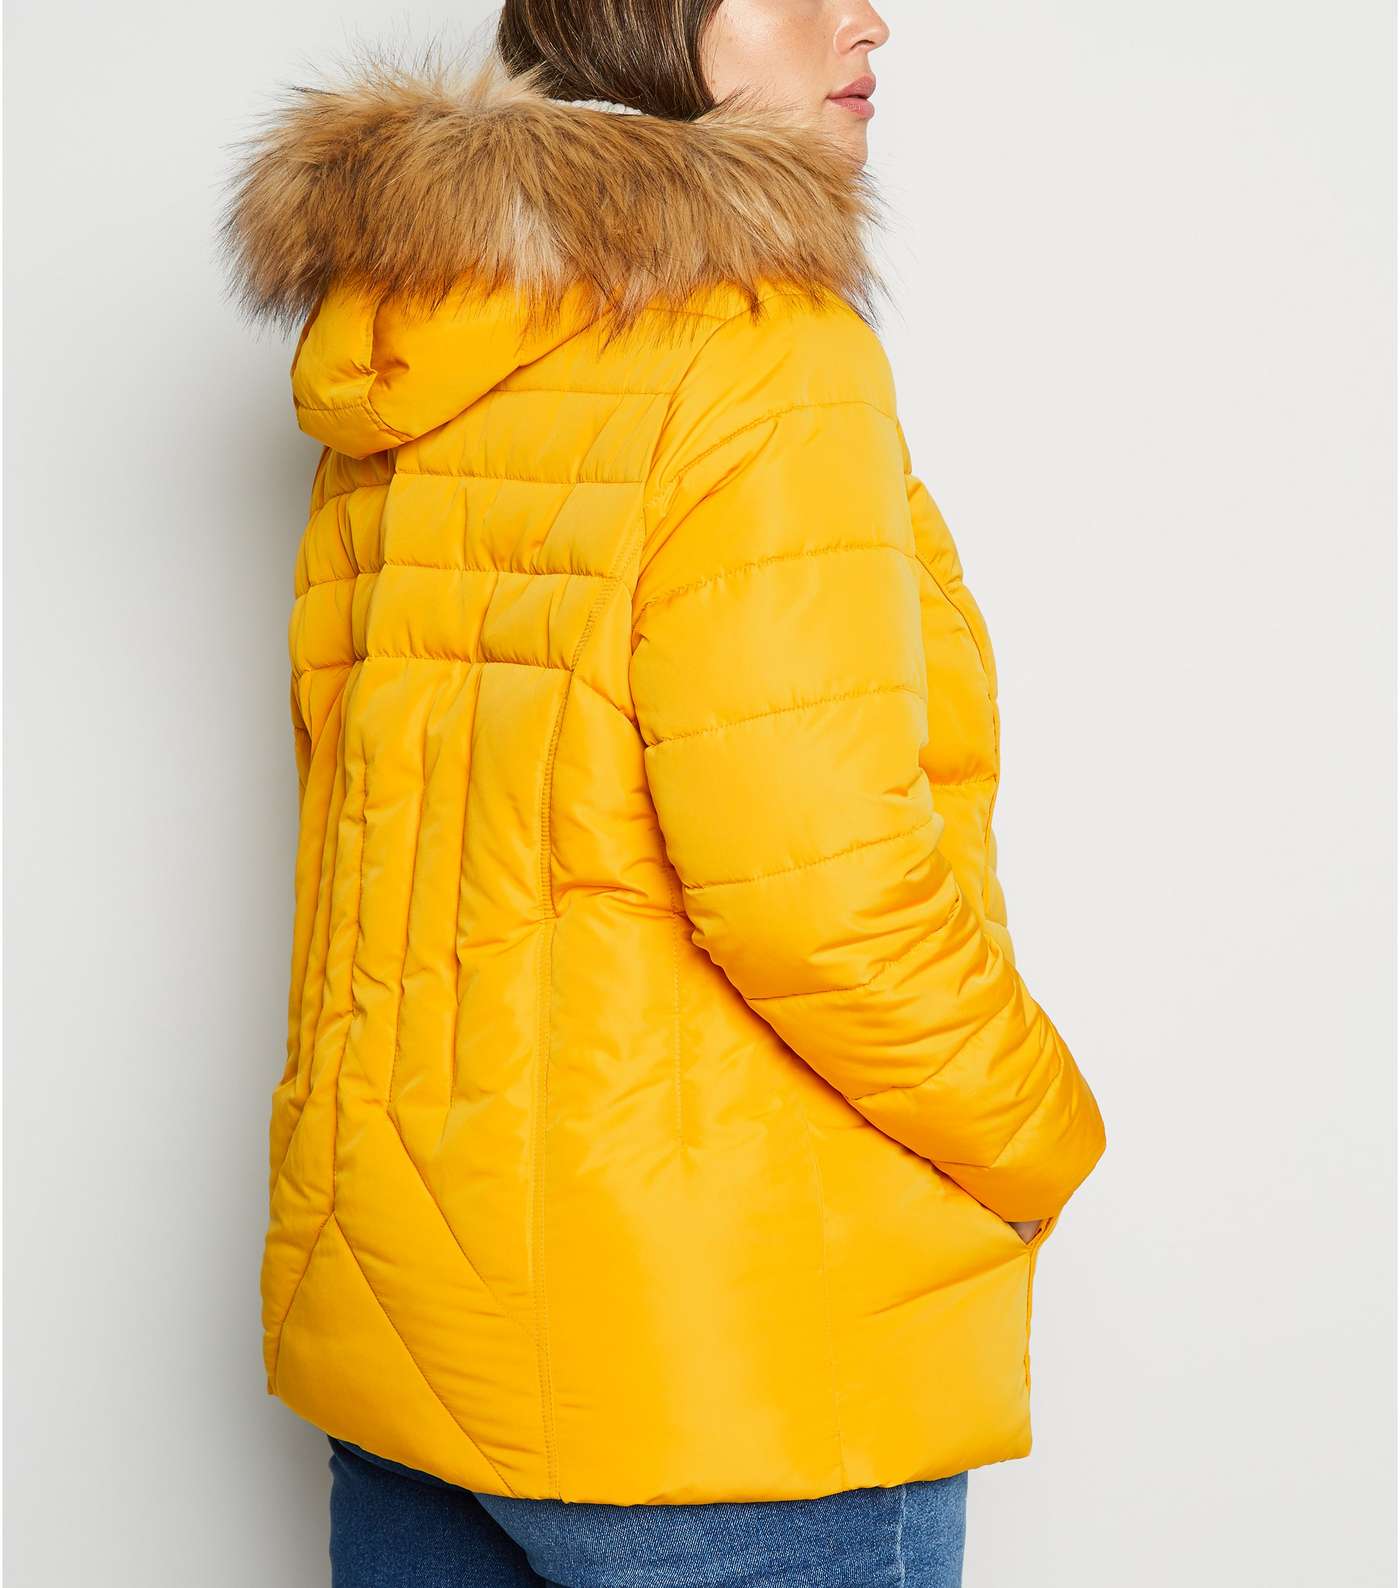 Curves Mustard Faux Fur Fitted Puffer Jacket Image 3